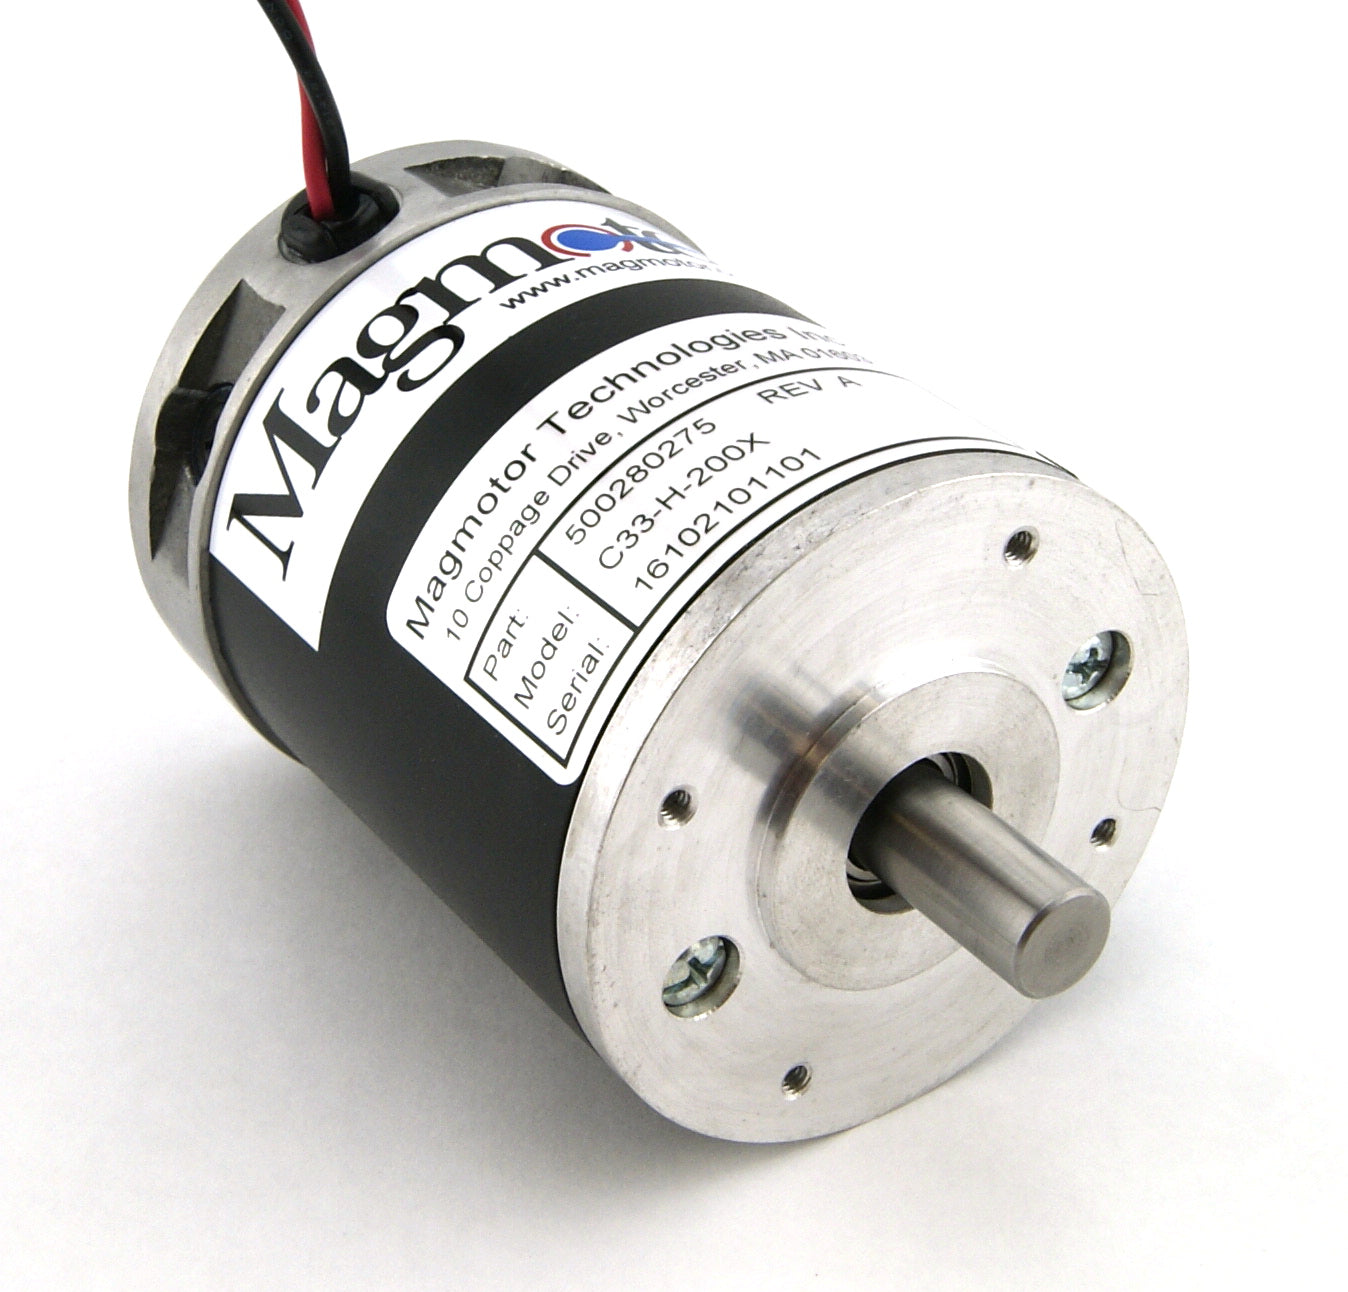 Magmotor C33-H-200X 24 to 60 Volt 4 Pole Brushed Motor 500280275 Front View